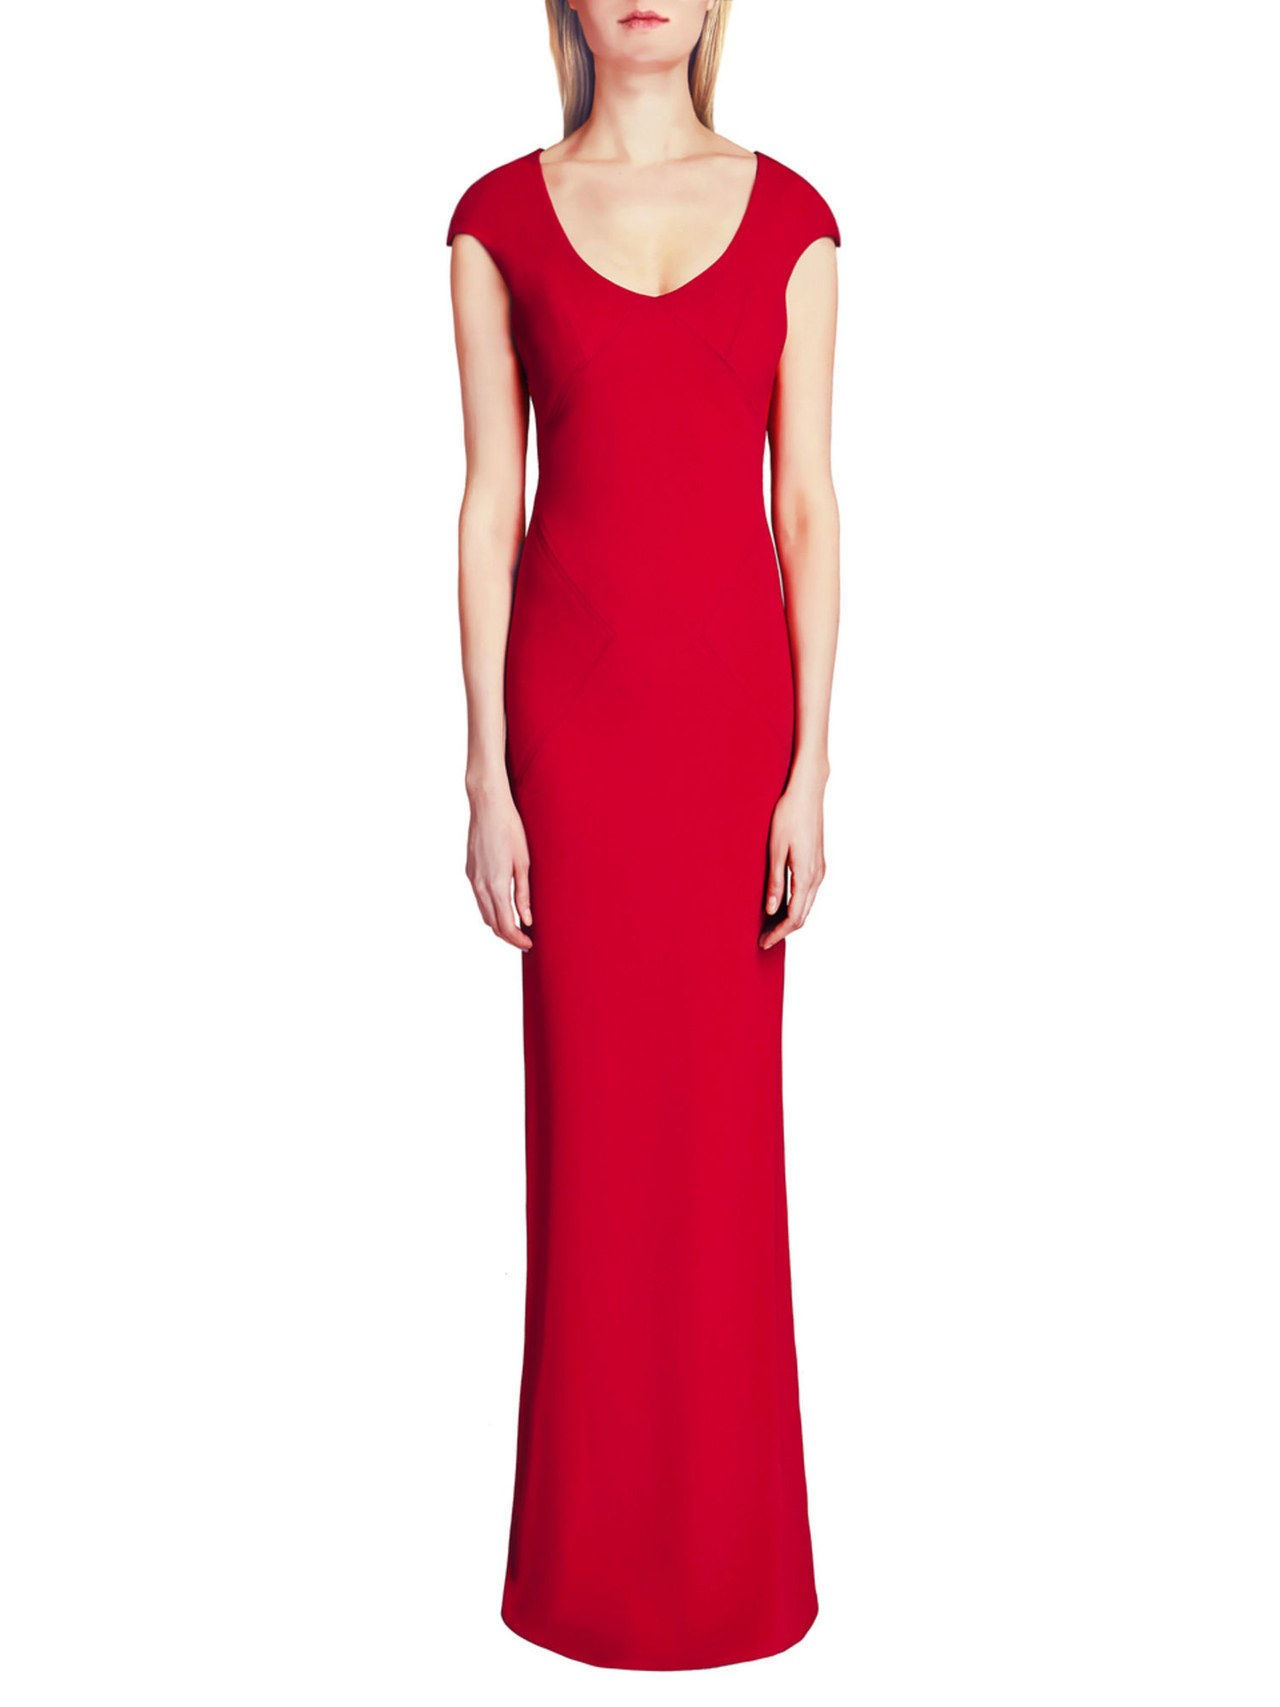 sonja morgan red evening gown